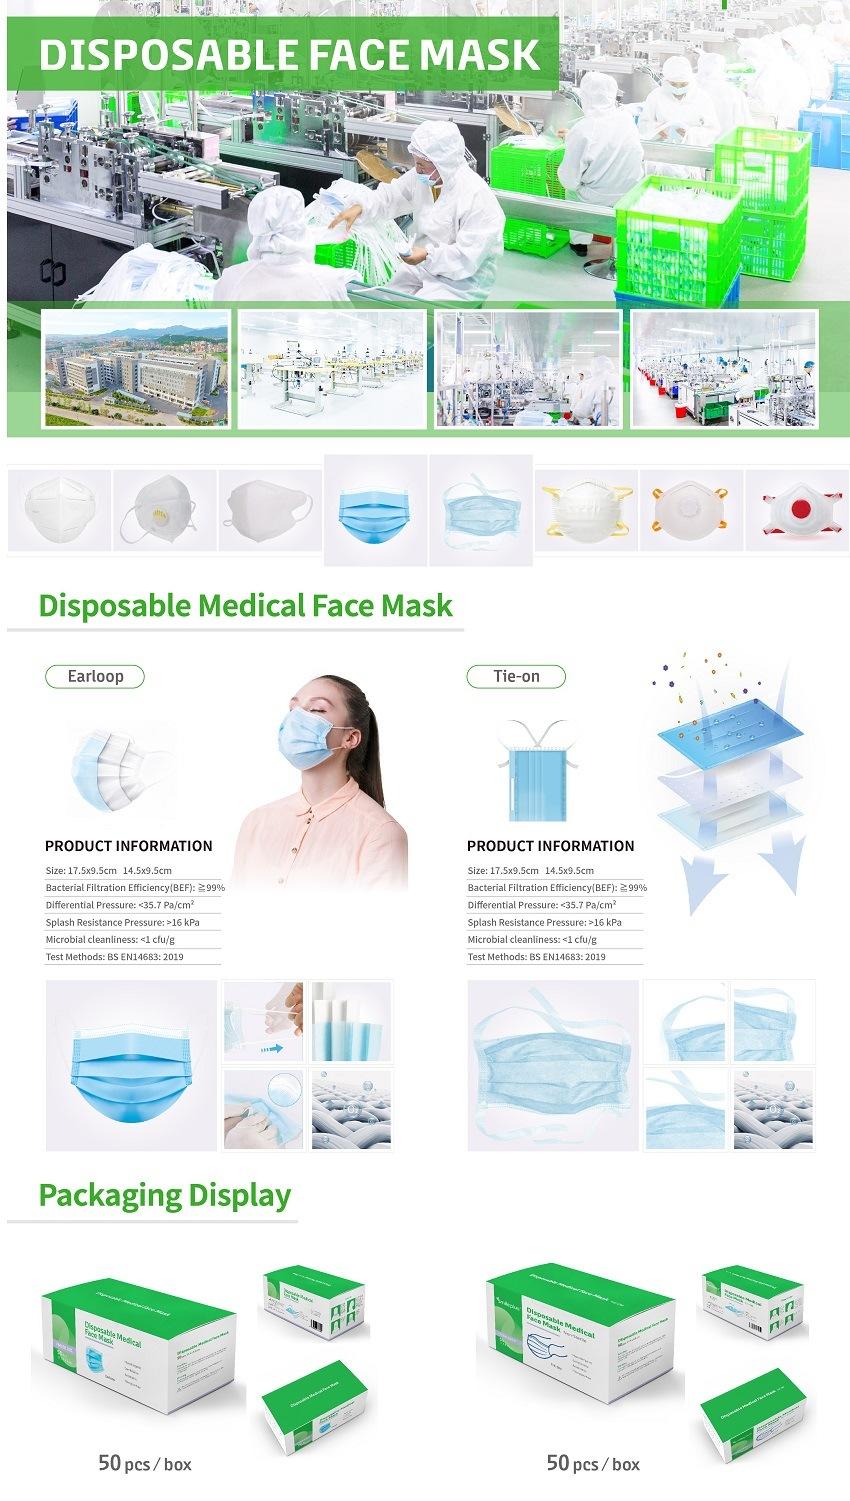 Goldenwell Protection Face Mask, High Filtration and Ventilation Security with Valve